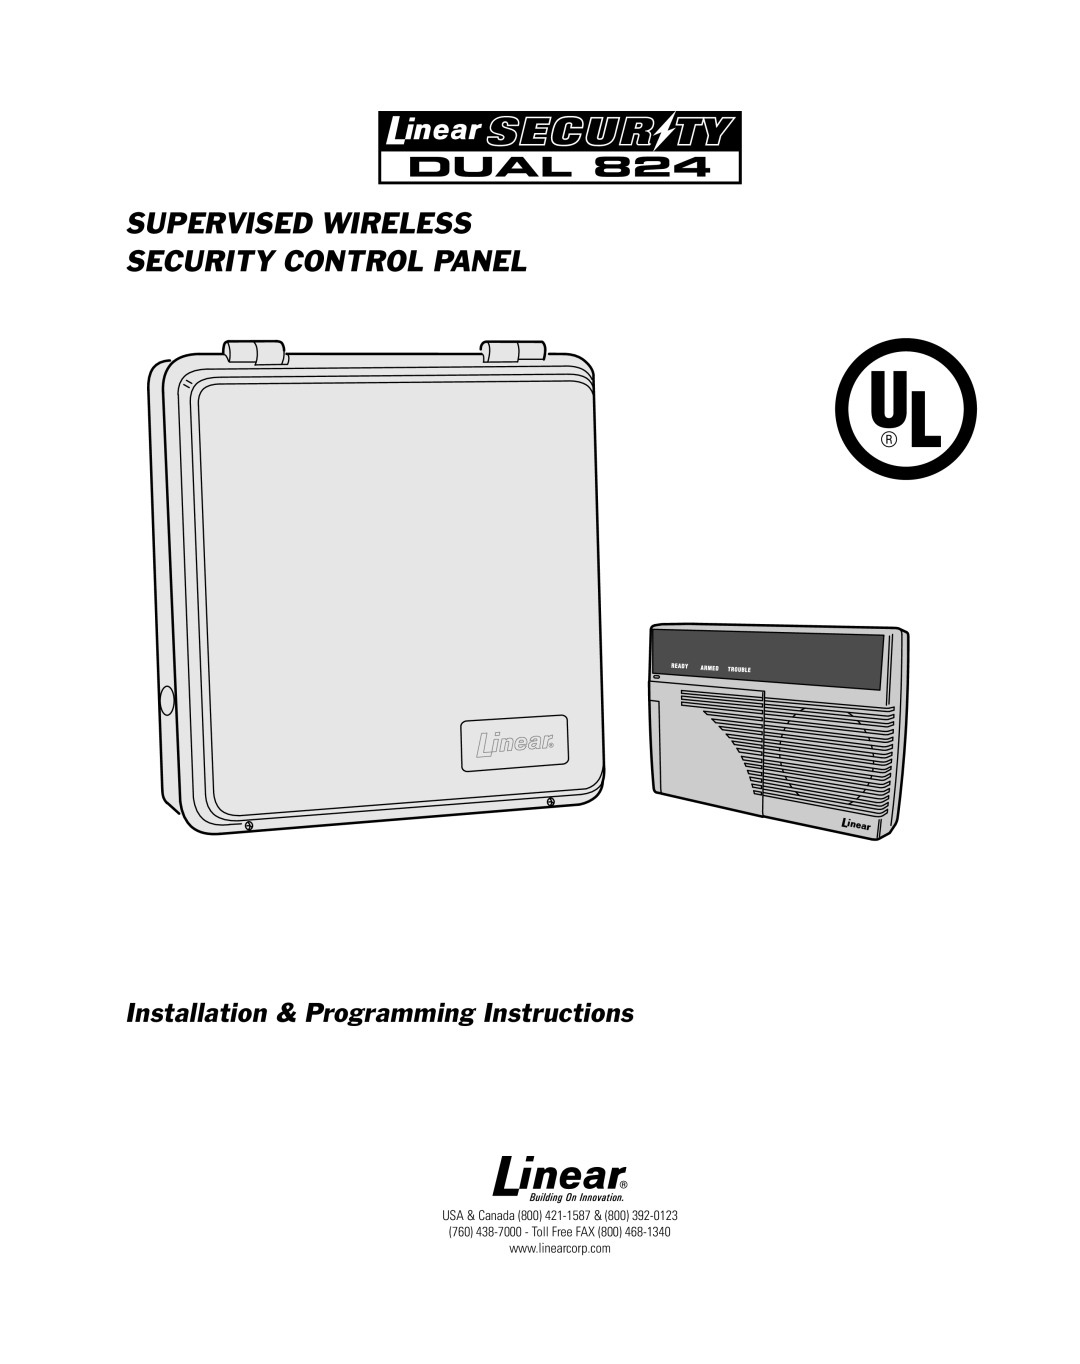 Linear DUAL 824 manual Supervised Wireless Security Control Panel, Installation & Programming Instructions, Dual 